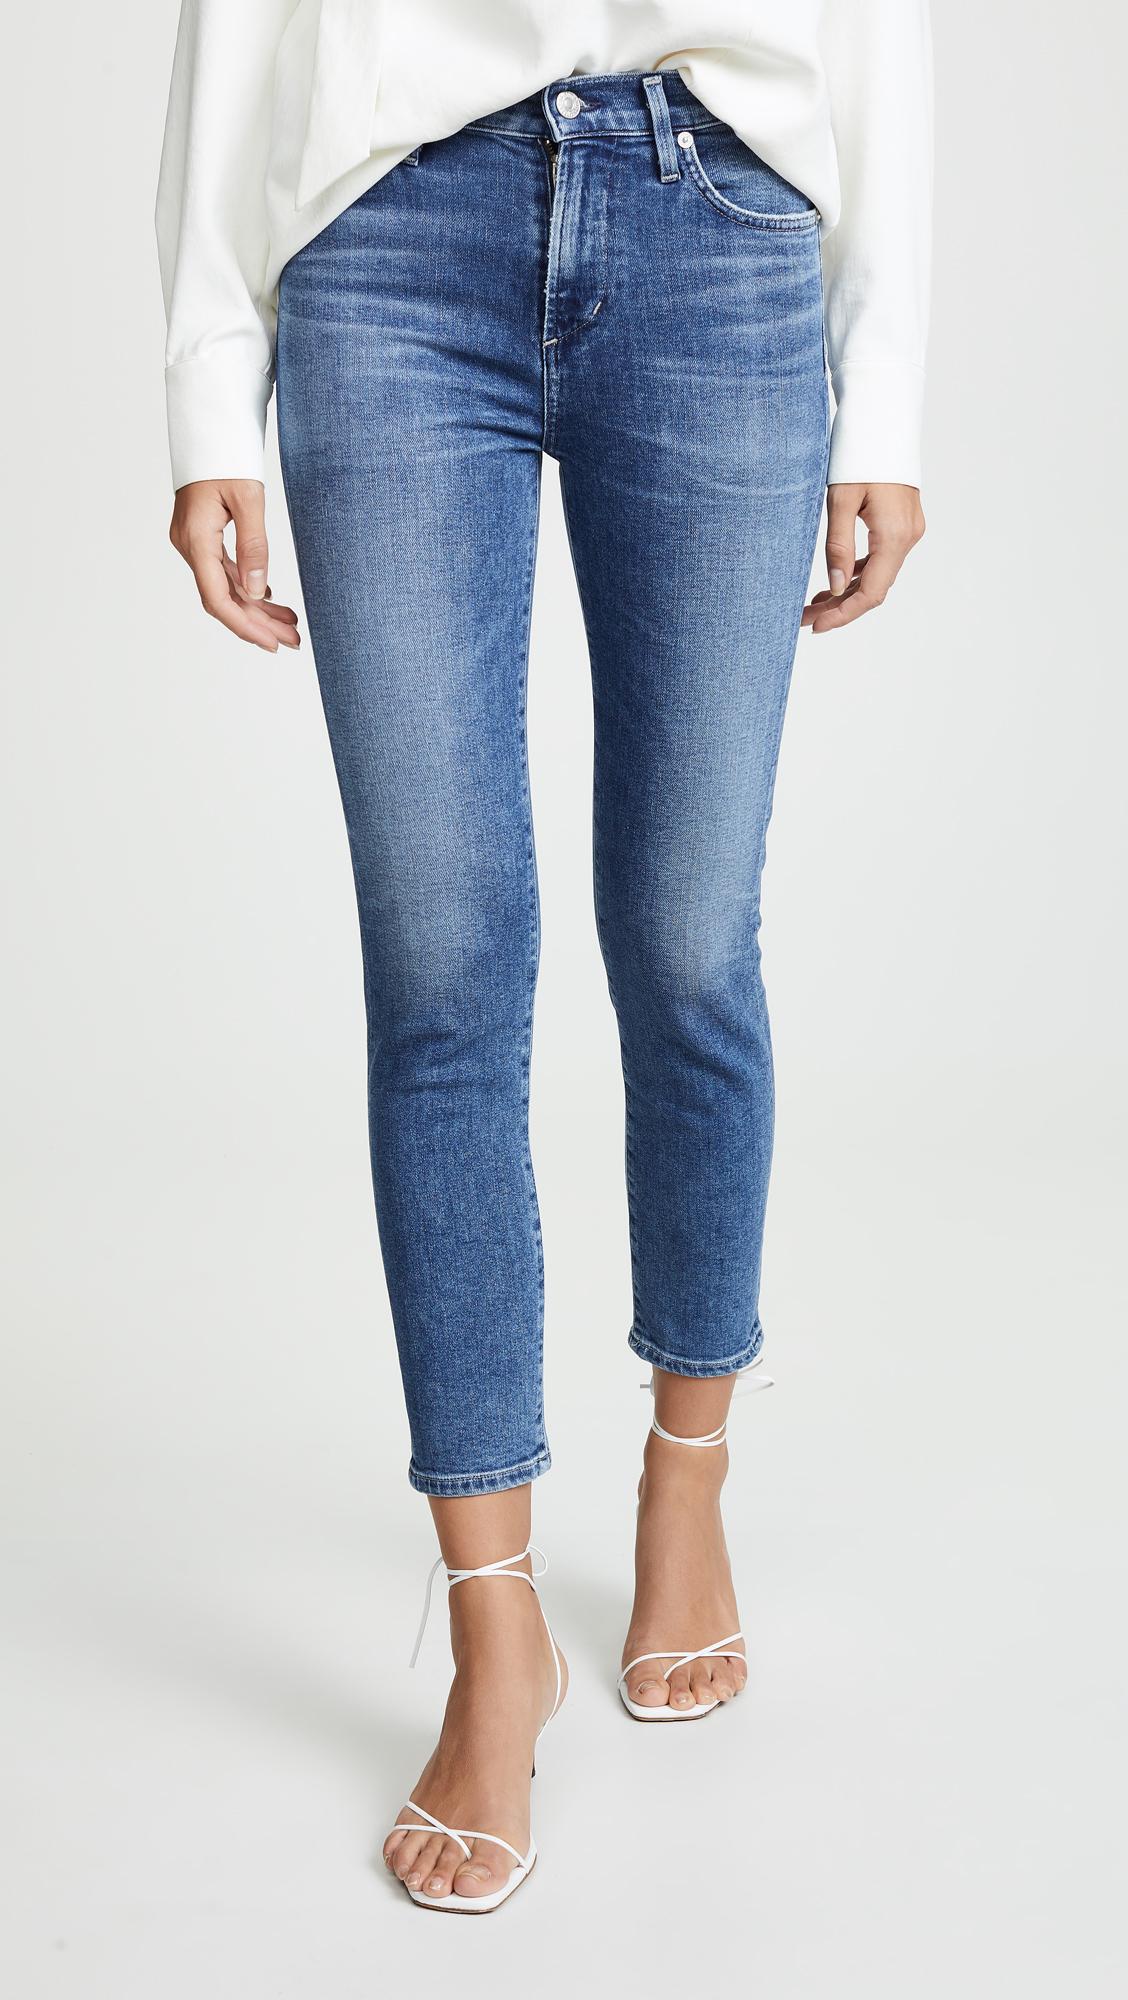 Lyst - Citizens of Humanity Rocket Crop Jeans in Blue